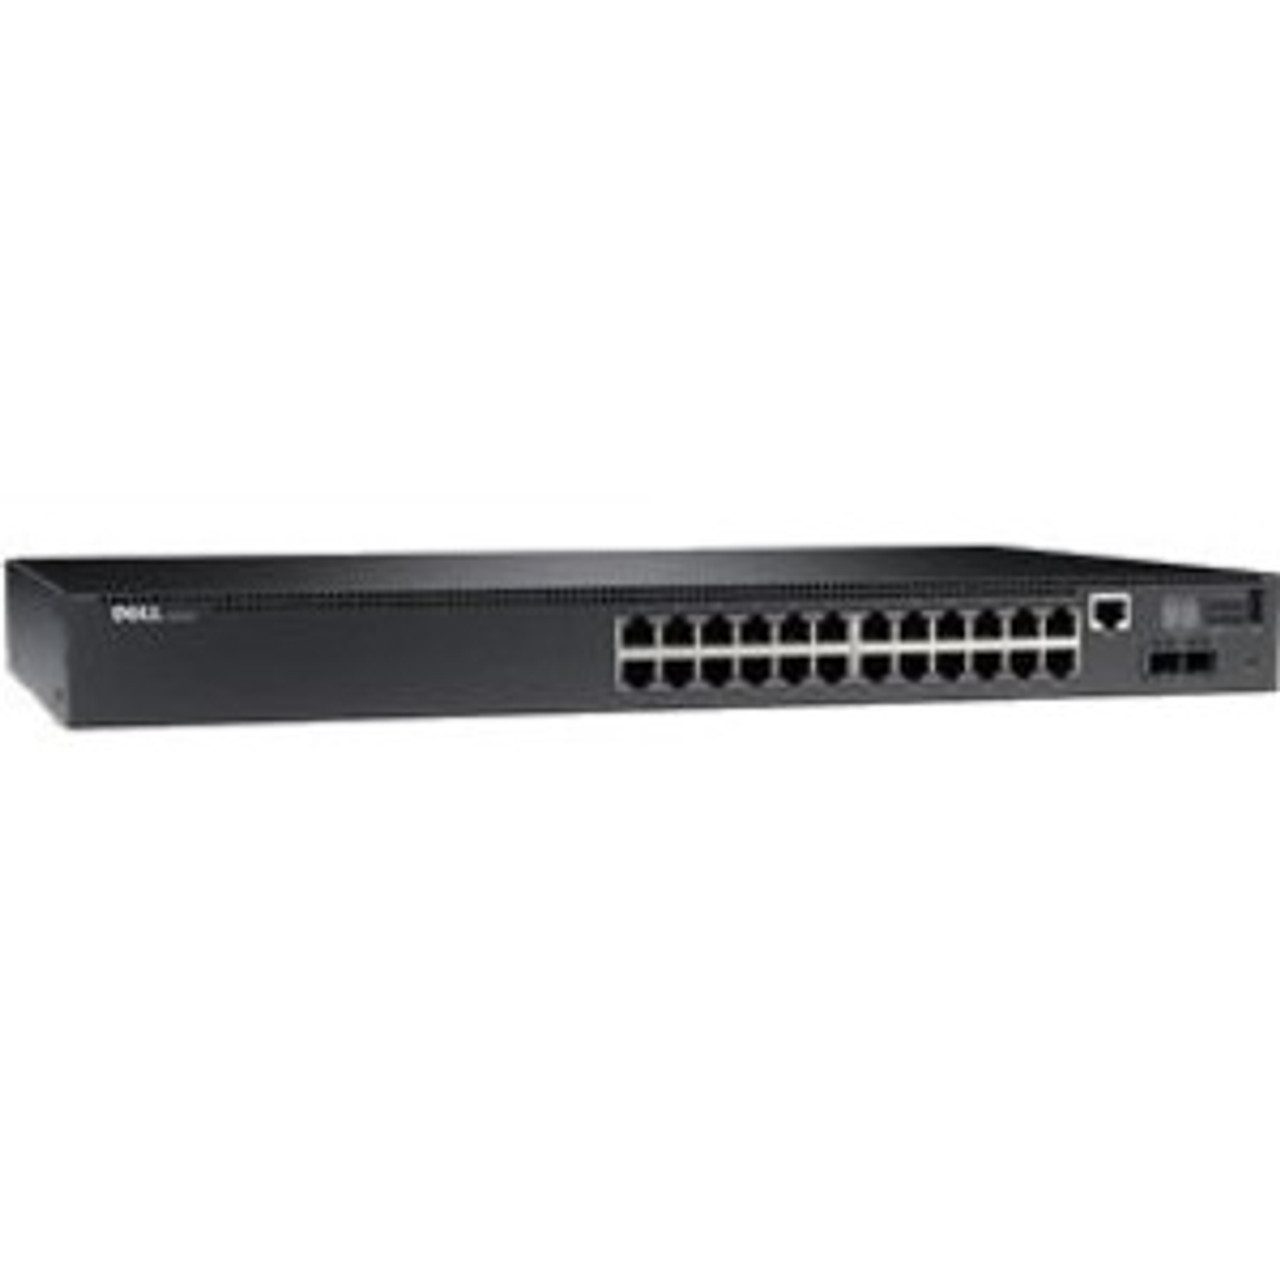 DN_N2024_1.1 Dell N2024 Ethernet Switch - 24 Ports - Manageable - Gigabit Ethernet, 10 Gigabit Ethernet - 10/100/1000Base-TX, 10GBase-X - 3 Layer Supported -